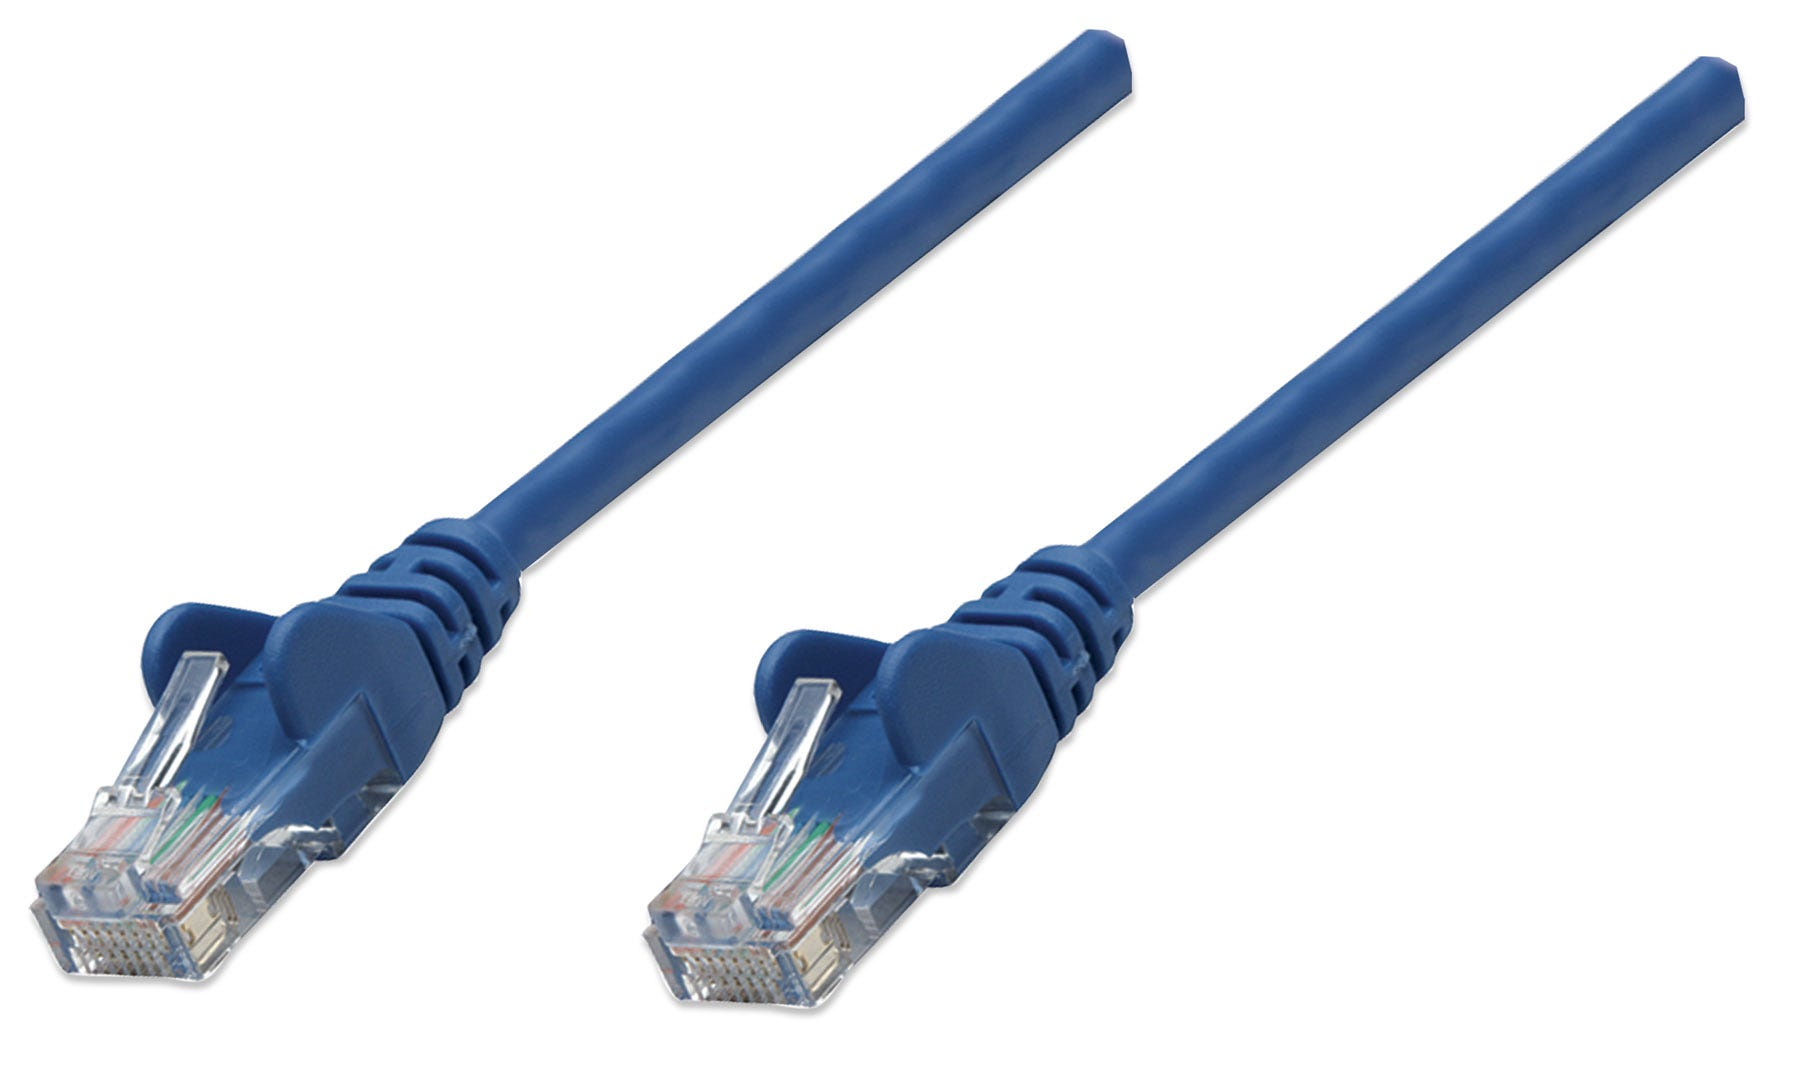 Cable Patch Intellinet 3.0 Mts ( 10.0 F) Cat-5E Utp Azul 319775